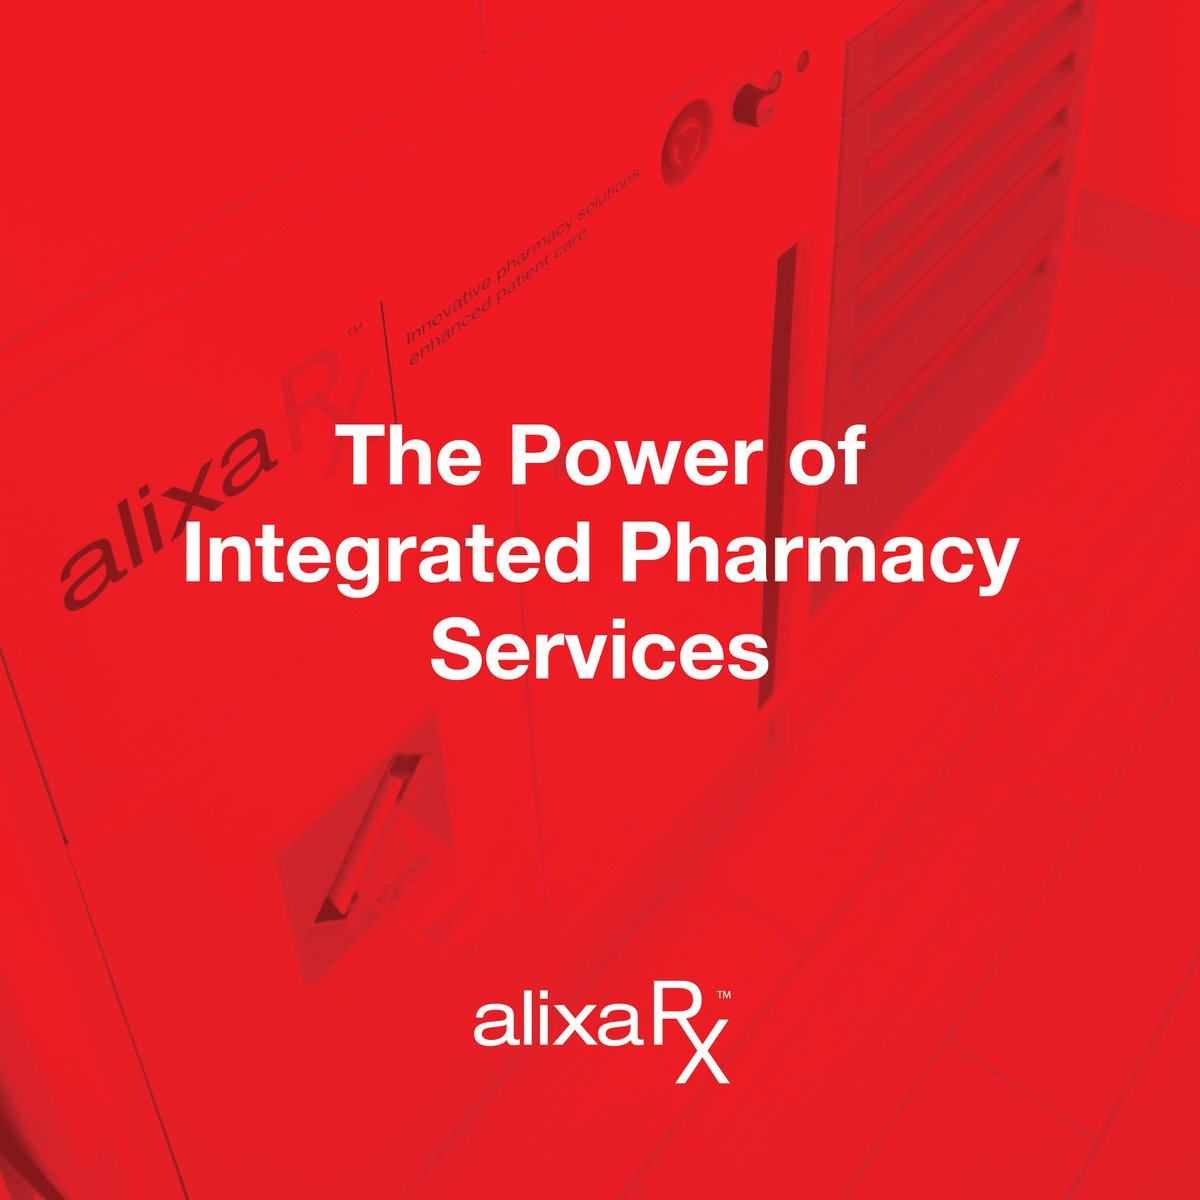 AlixaRx offers pharmacy solutions to community pharmacies that enable seamless communication with all EMR systems for better patient care.

Explore more:
AlixaRx.com

#AlixaRx #LTC #PatientCentered #PharmacyServices